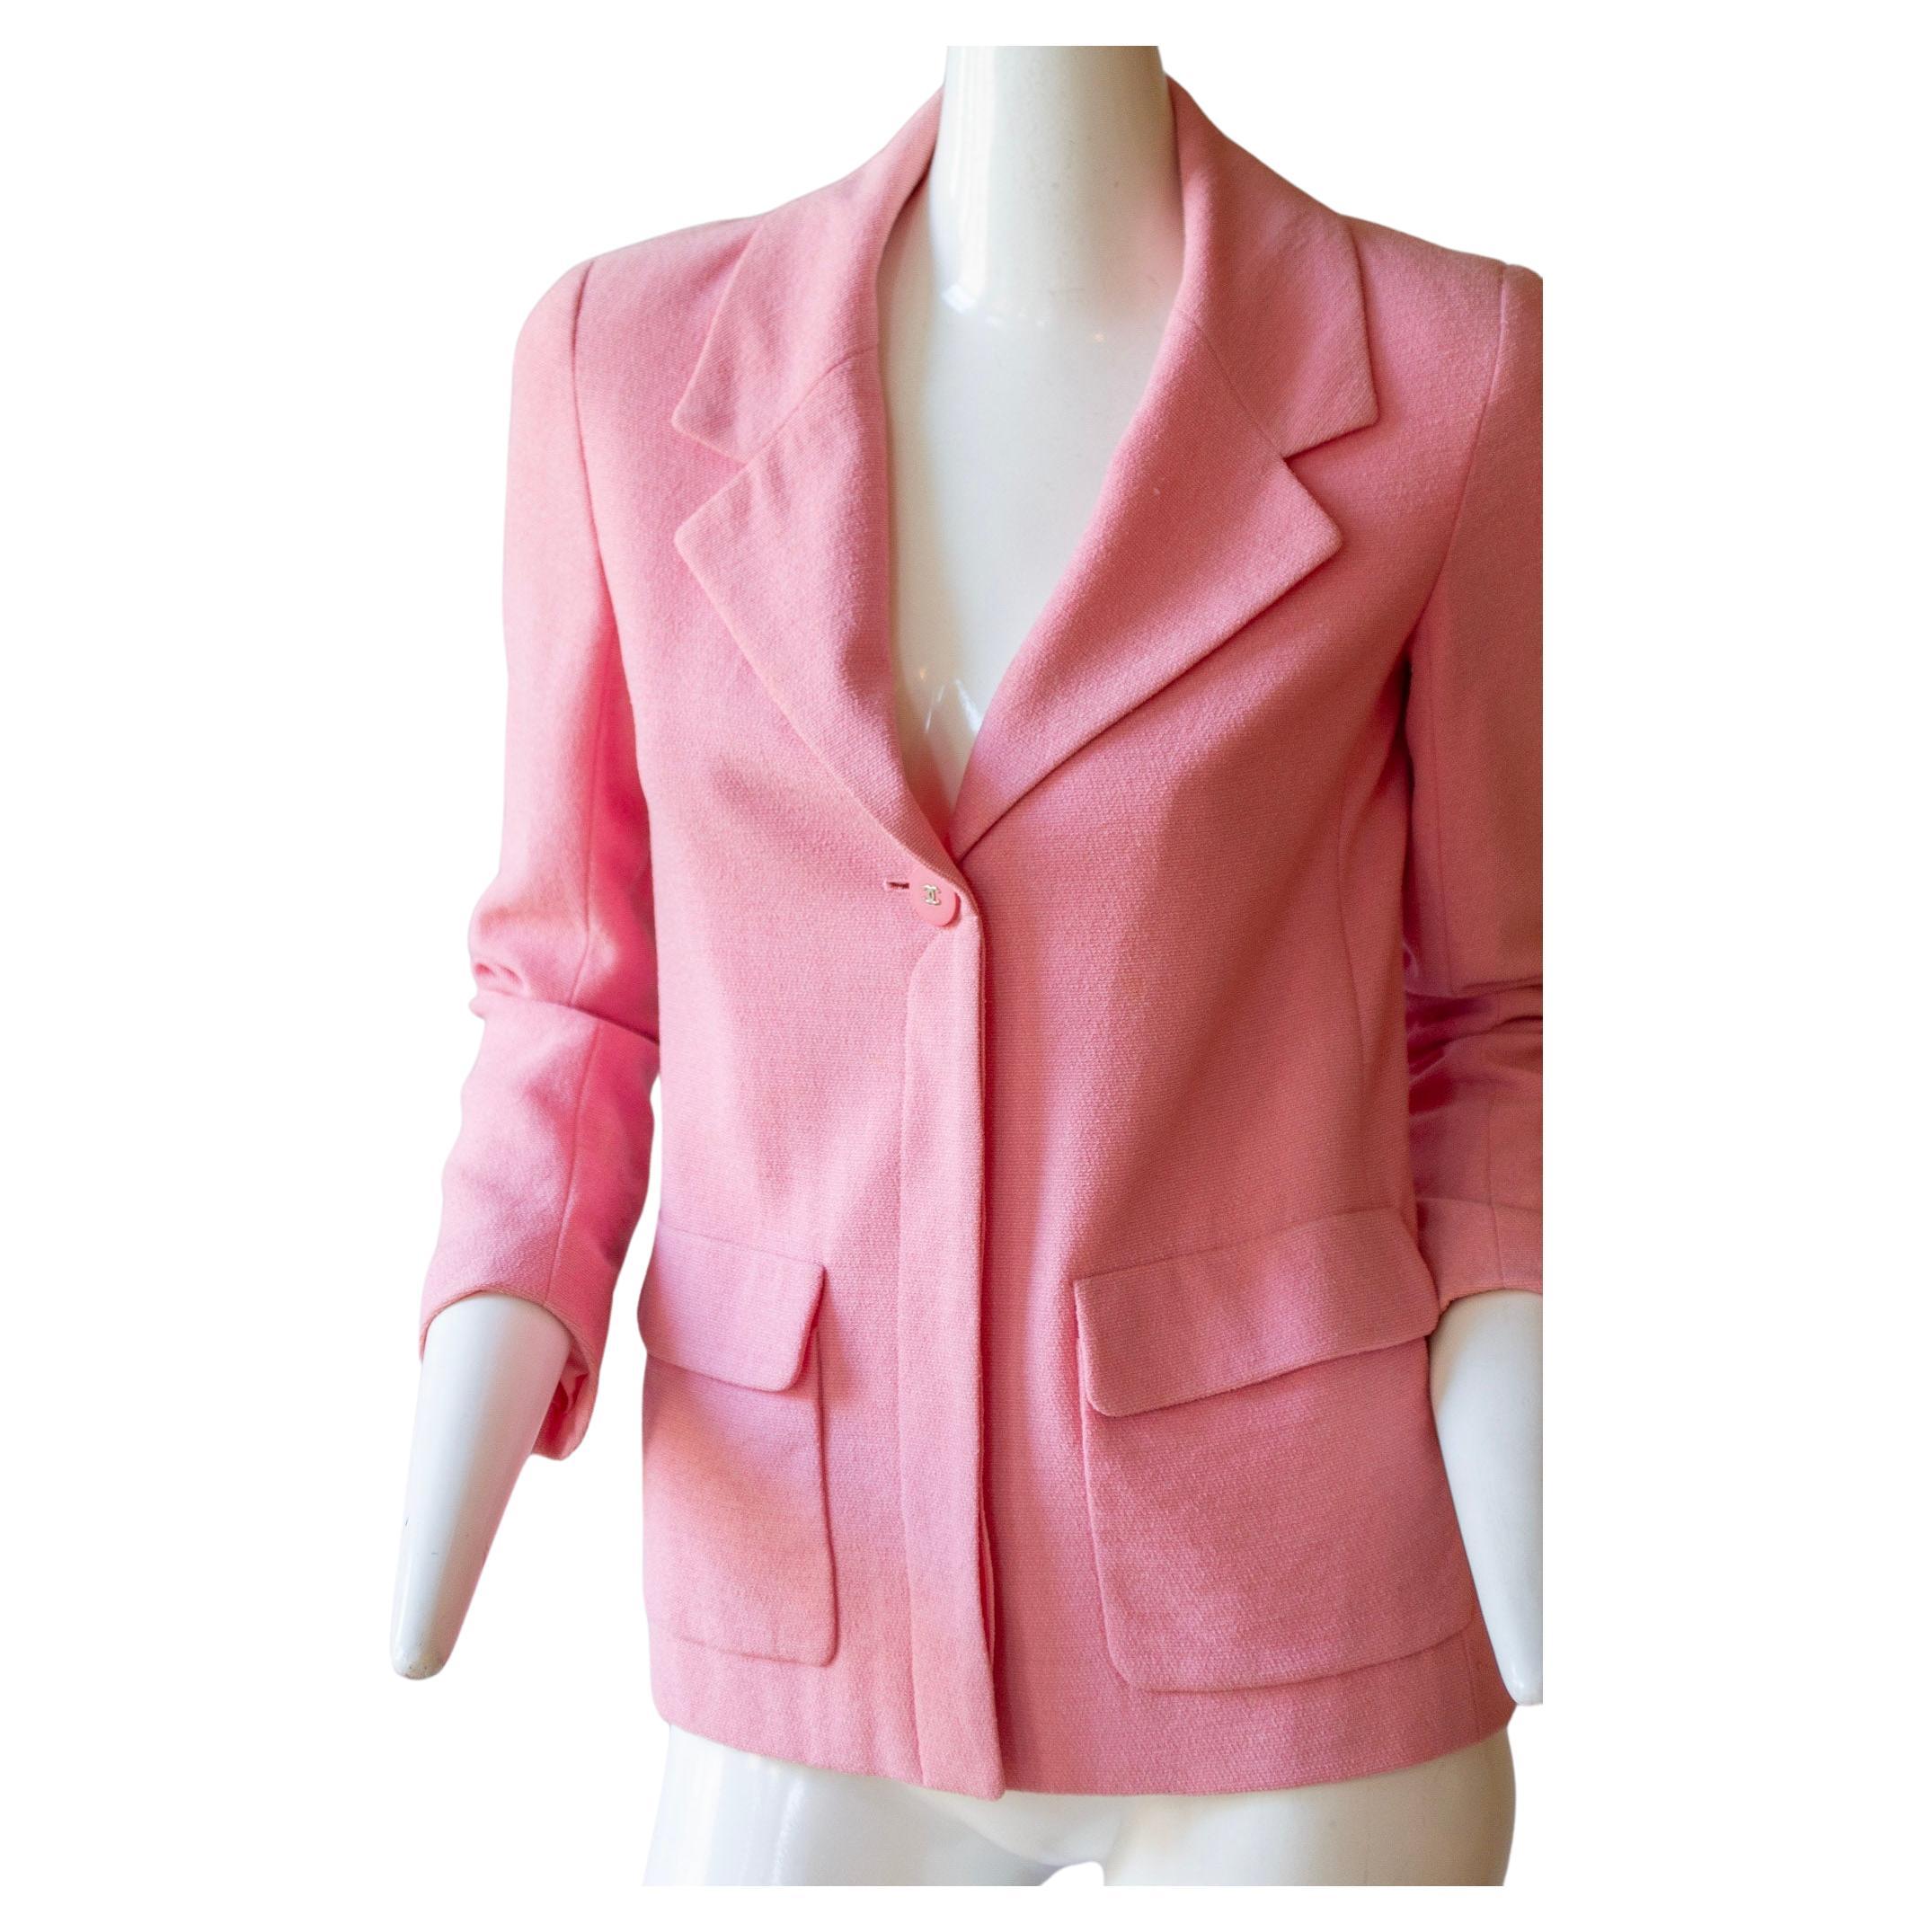 Vintage Pink Chanel blazer with CC buttons

Wool blend with logo silk lining

PROVENANCE: Previously owned by Terry Moore, an American actress nominated for Academy Award for Best Supporting Actress. She is one of the last surviving stars from the